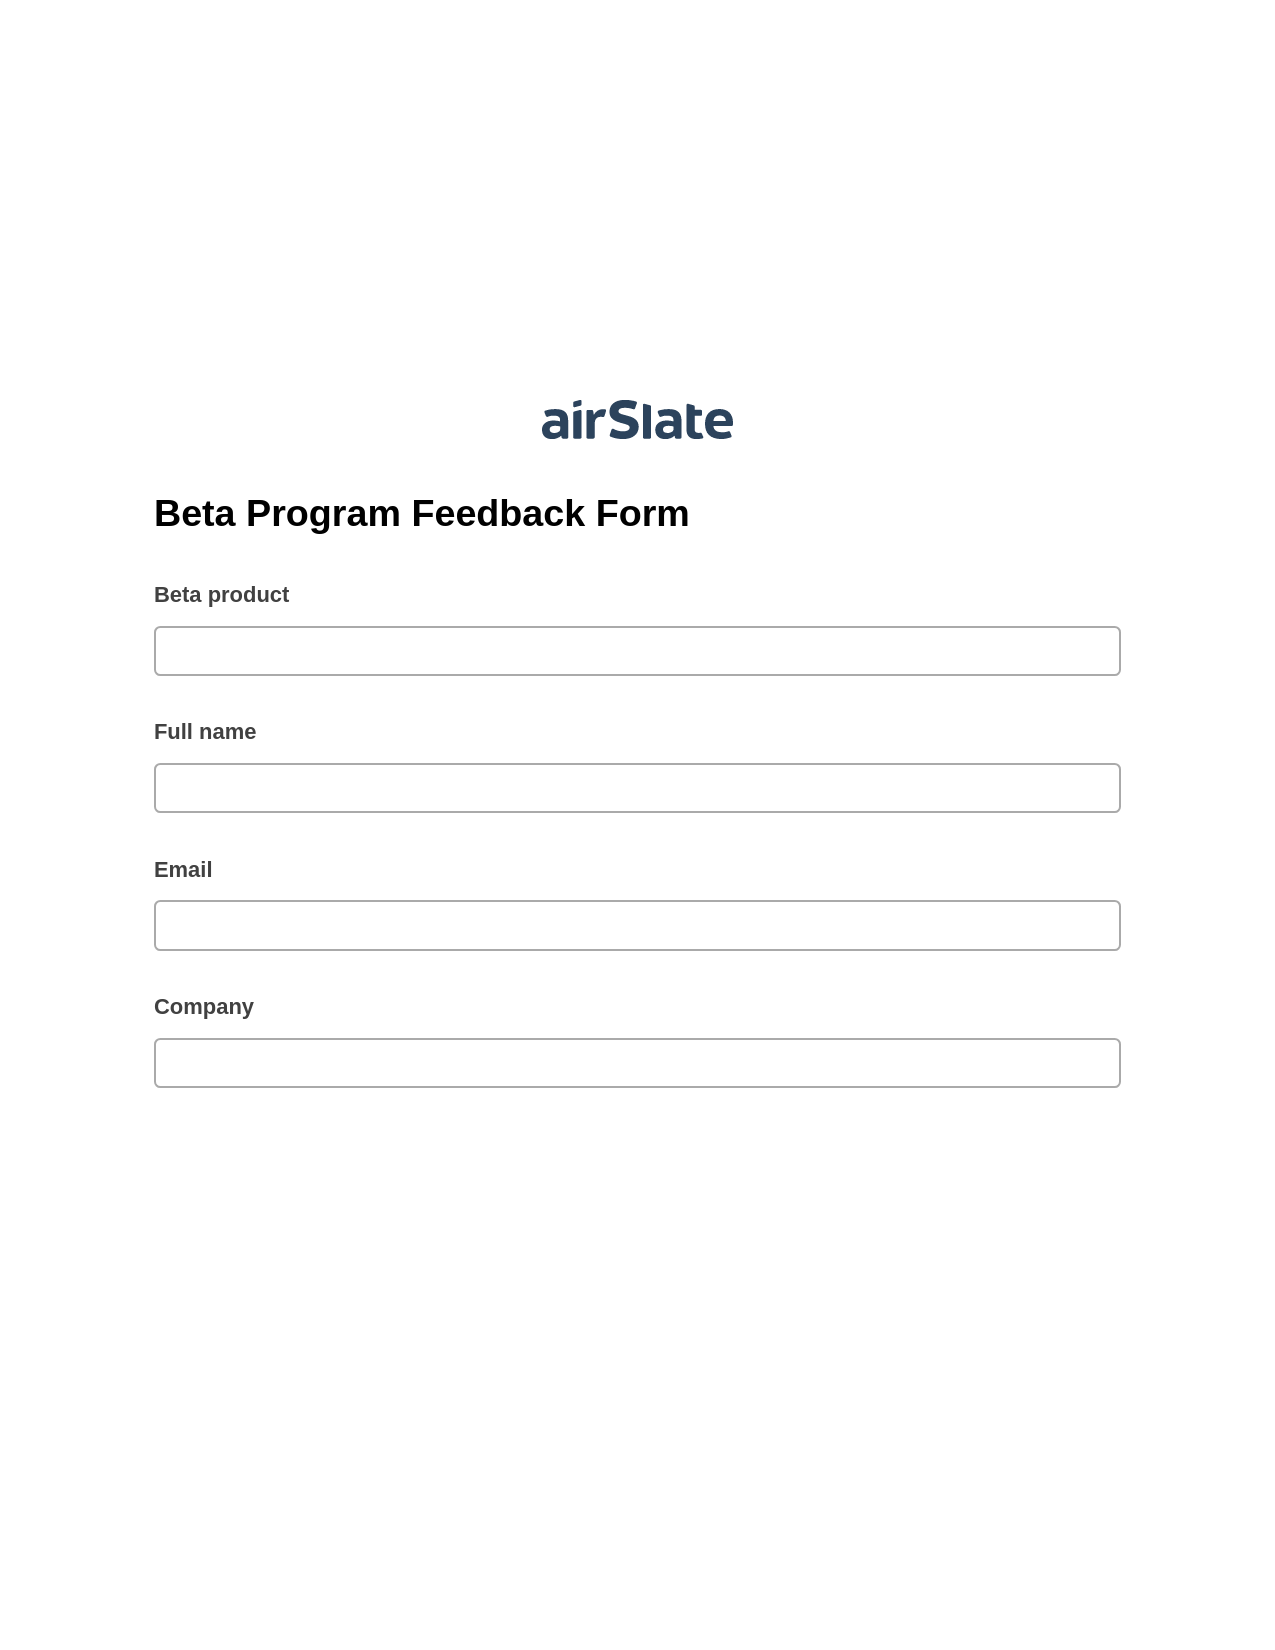 Beta Program Feedback Form Pre-fill Slate from MS Dynamics 365 Records Bot, Assign Roles to Recipients Bot, Archive to SharePoint Folder Bot